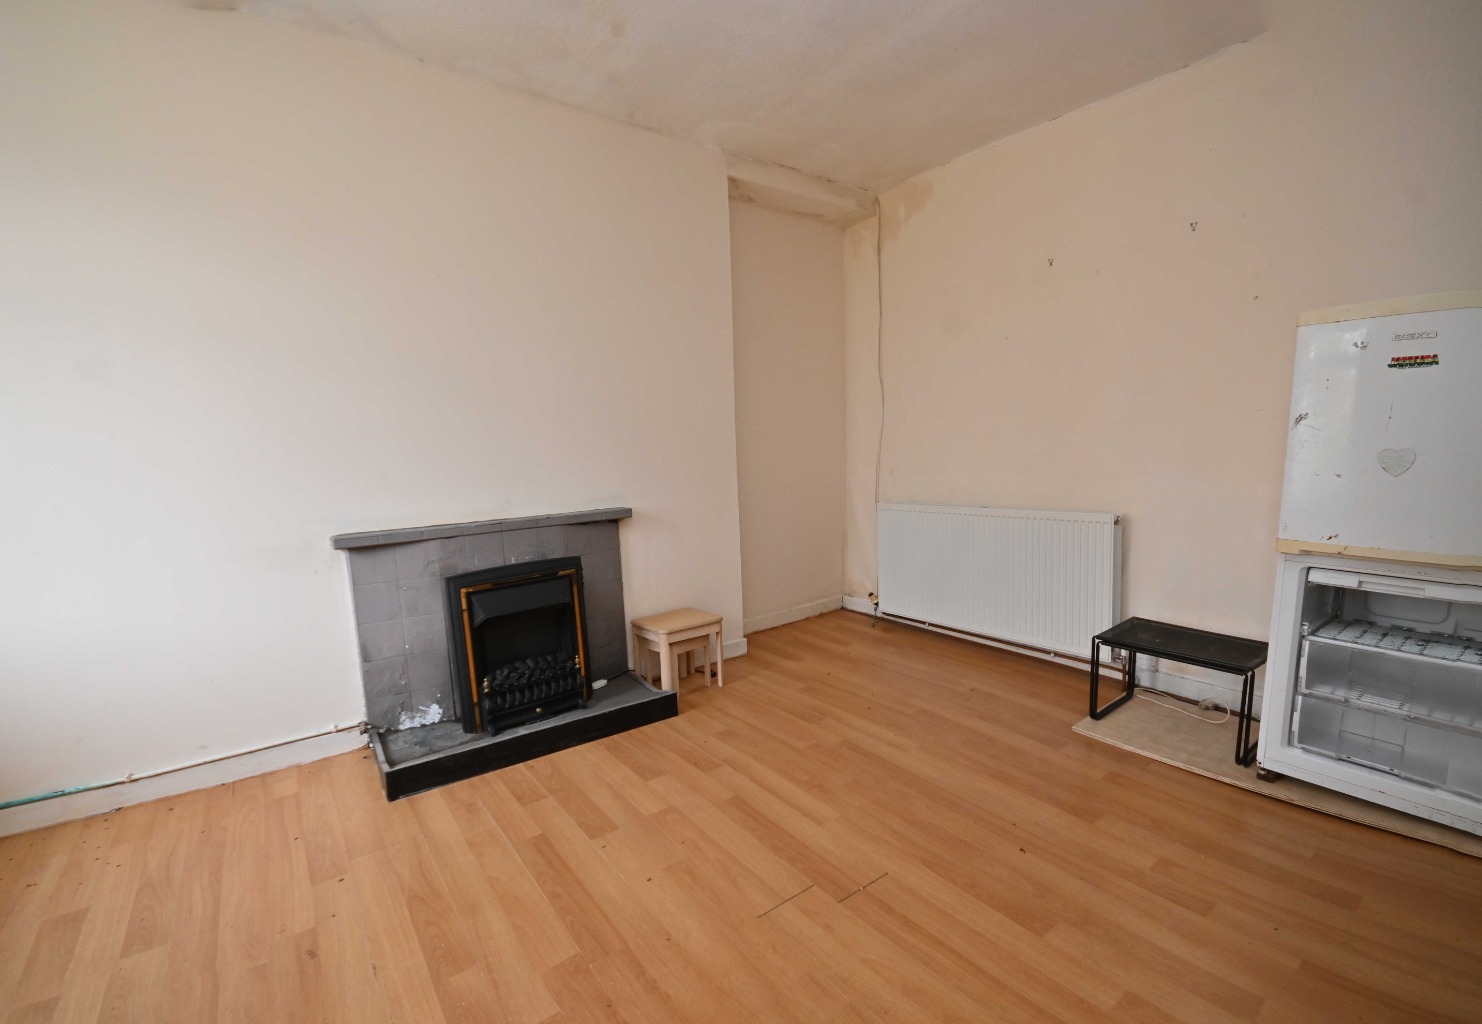 1 bed terraced bungalow for sale, Dunoon  - Property Image 5